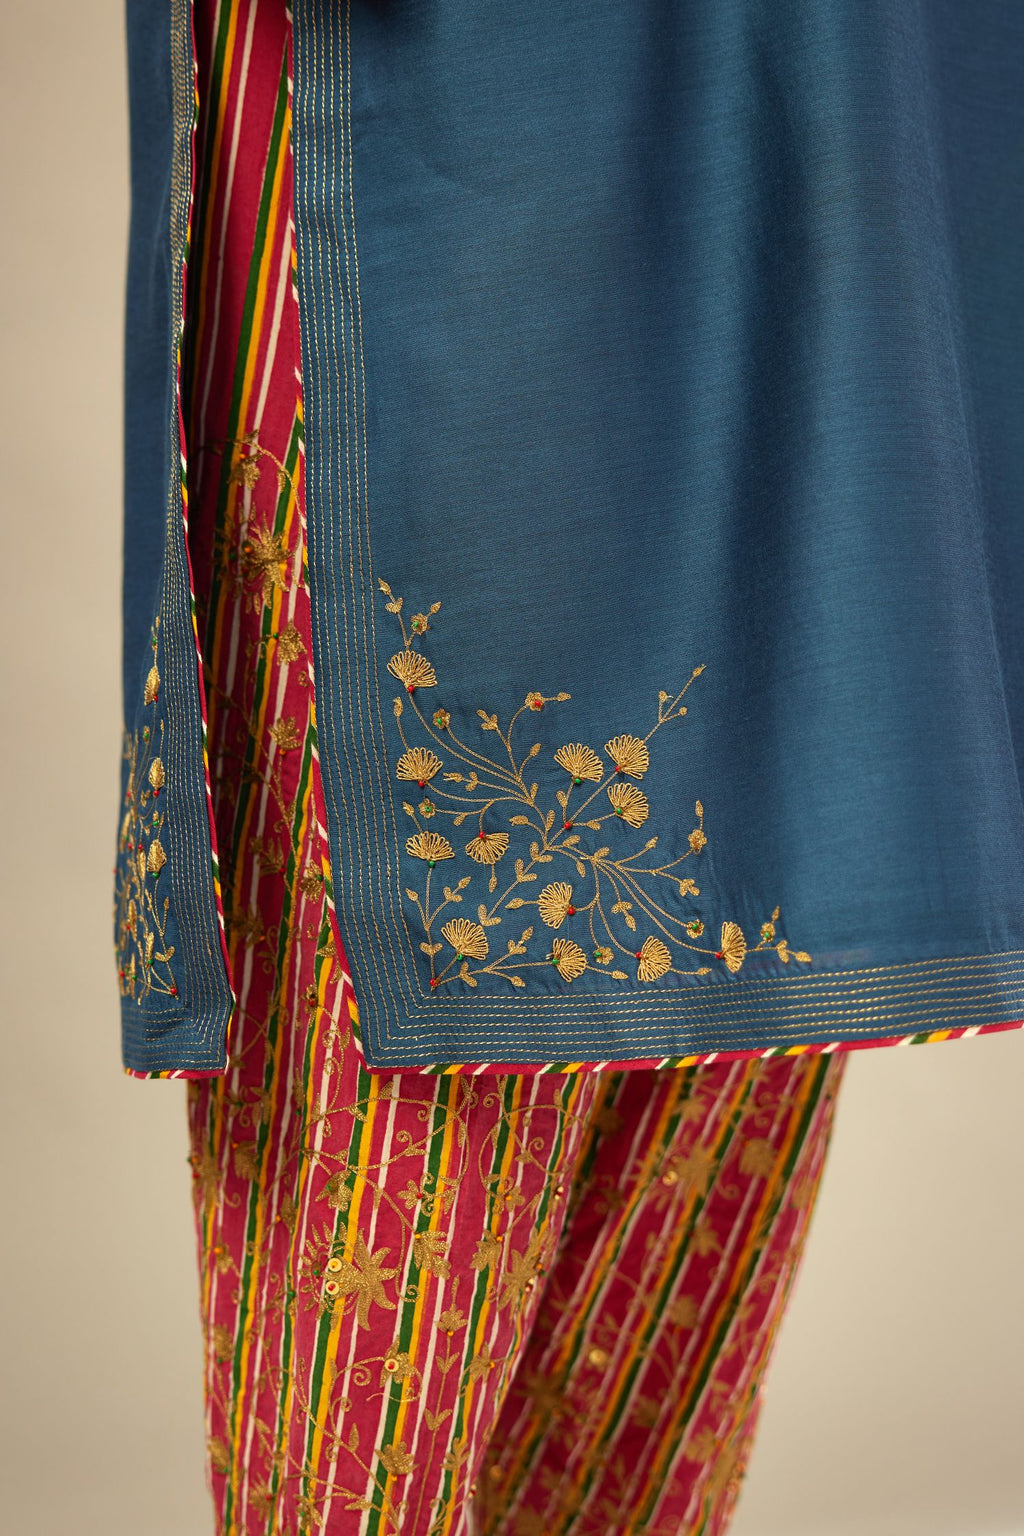 Teal blue silk Chanderi kurta set with zari embroidery, highlighted with golden zari quilting